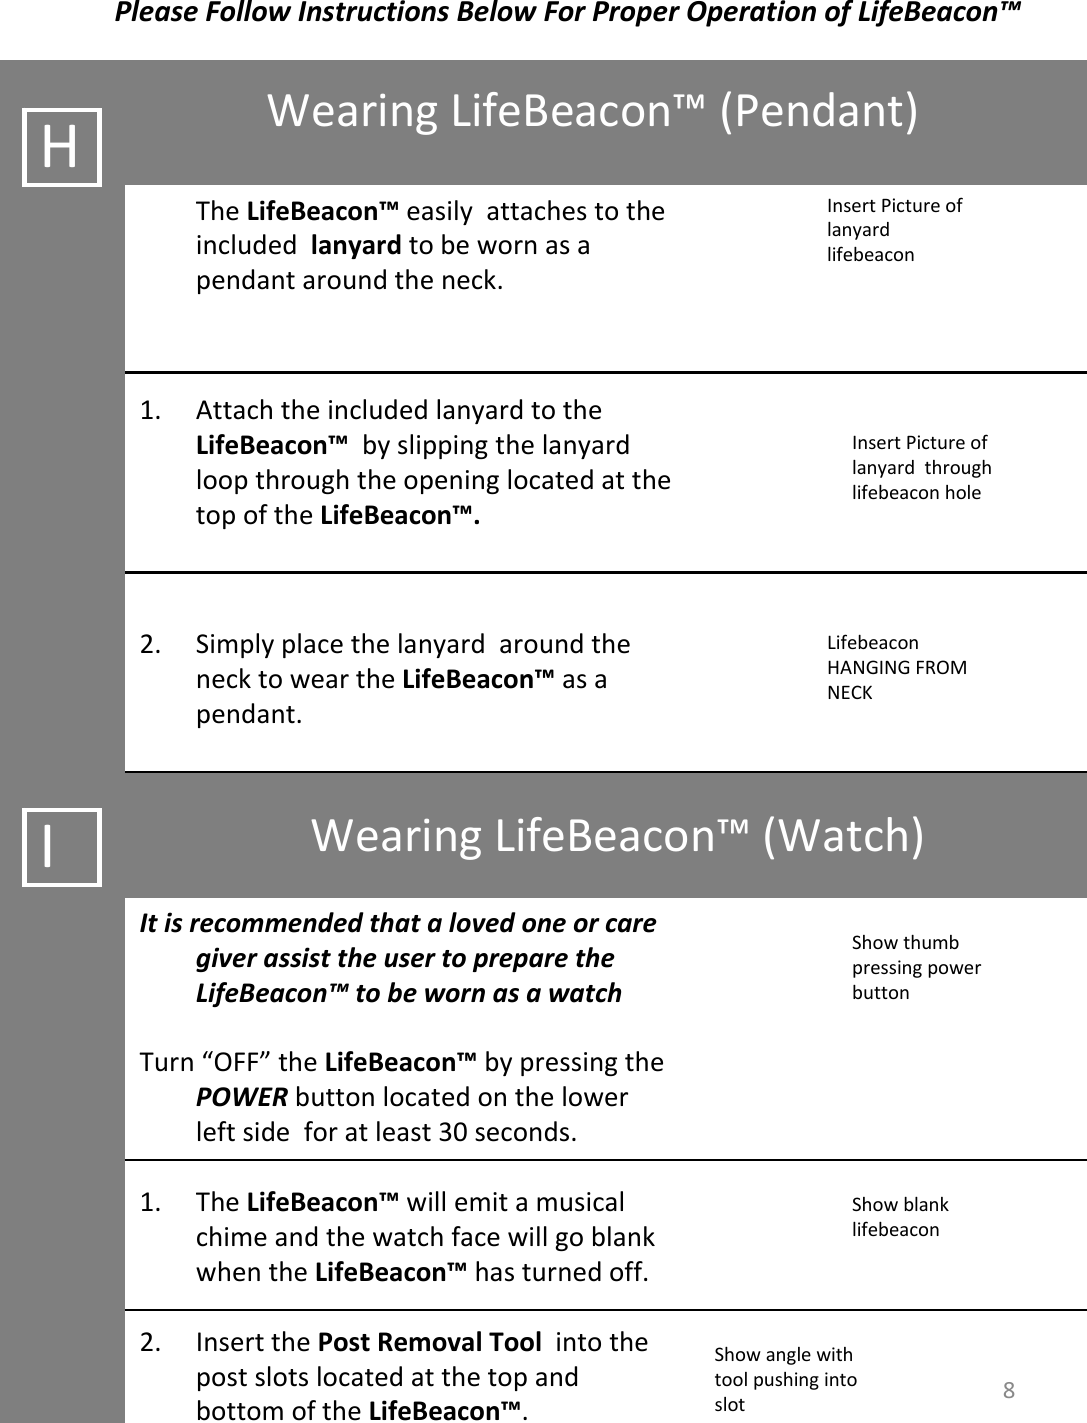 WearingLifeBeacon™ (Pendant)PleaseFollowInstructionsBelowForProperOperationofLifeBeacon™BCInsertPictureoflanyardlifebeaconHTheLifeBeacon™ easilyattachestotheincludedlanyard tobewornasapendantaroundtheneck.1. AttachtheincludedlanyardtotheLifeBeacon™ byslippingthelanyardloopthroughtheopeninglocatedatthetopoftheLifeBeacon™.2. SimplyplacethelanyardaroundthenecktoweartheLifeBeacon™ asapendant.IWearingLifeBeacon™ (Watch)ItisrecommendedthatalovedoneorcaregiverassisttheusertopreparetheLifeBeacon™ tobewornasawatchTurn“OFF” theLifeBeacon™ bypressingthePOWER buttonlocatedonthelowerleftsideforatleast30seconds.1. TheLifeBeacon™ willemitamusicalchimeandthewatchfacewillgoblankwhentheLifeBeacon™ hasturnedoff.2. InsertthePostRemovalToolintothepostslotslocatedatthetopandbottomoftheLifeBeacon™.InsertPictureoflanyardthroughlifebeaconholeLifebeaconHANGINGFROMNECKShowthumbpressingpowerbuttonShowblanklifebeaconShowanglewithtoolpushingintoslot 8